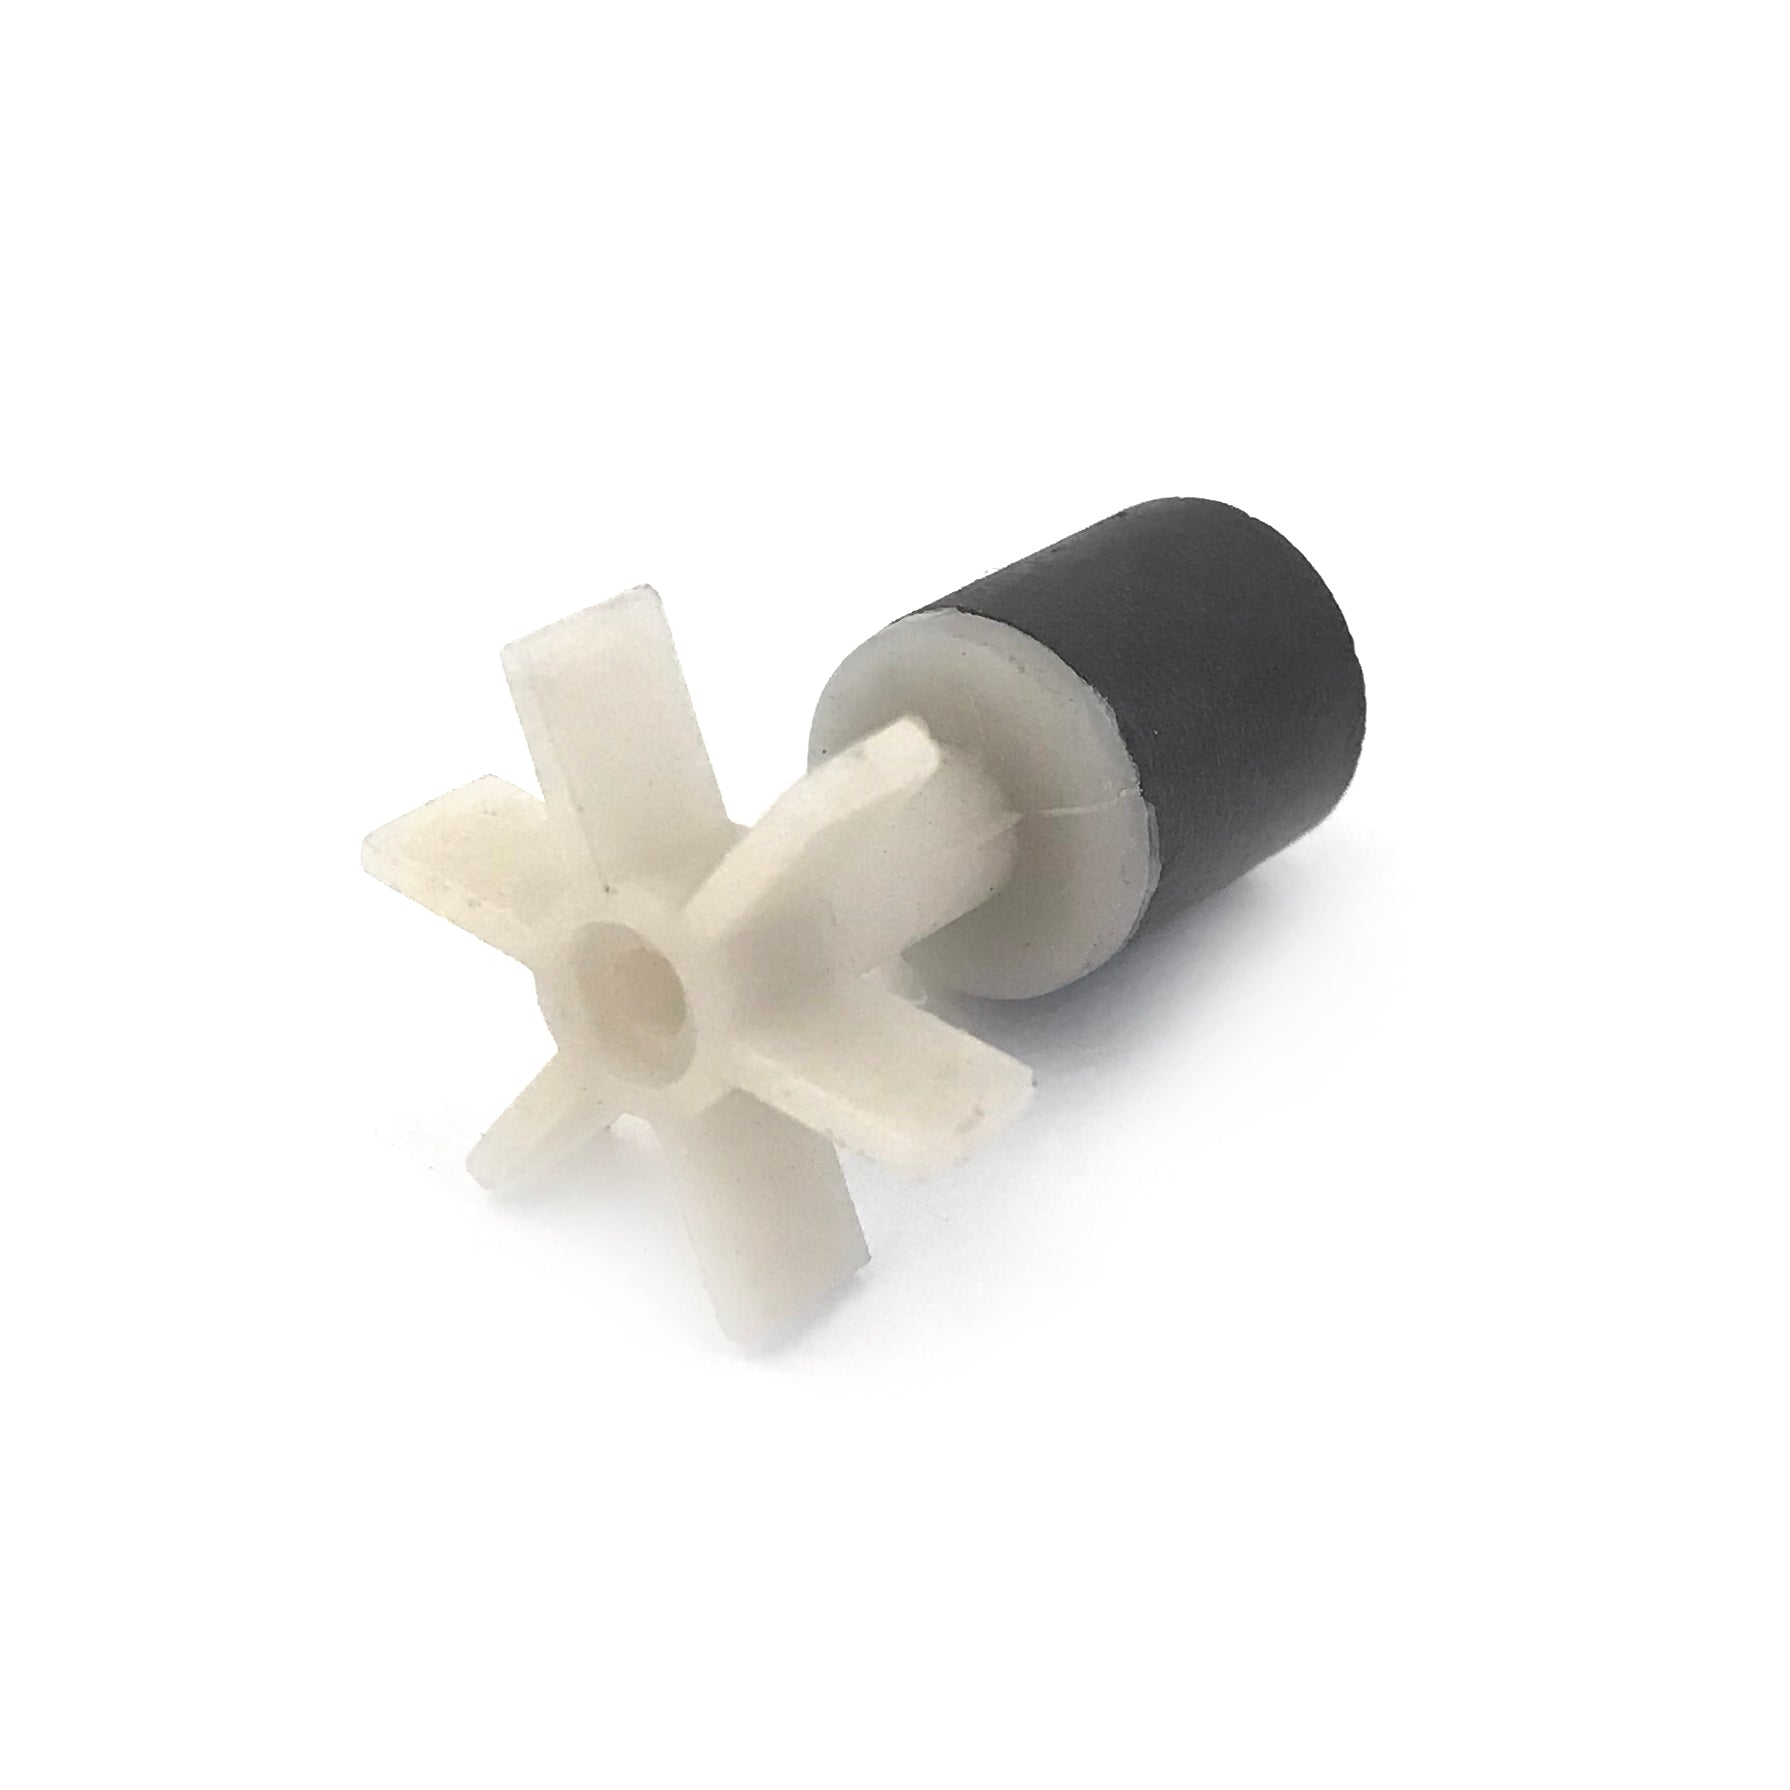 REPLACEMENT IMPELLER FOR SP-93 PUMP